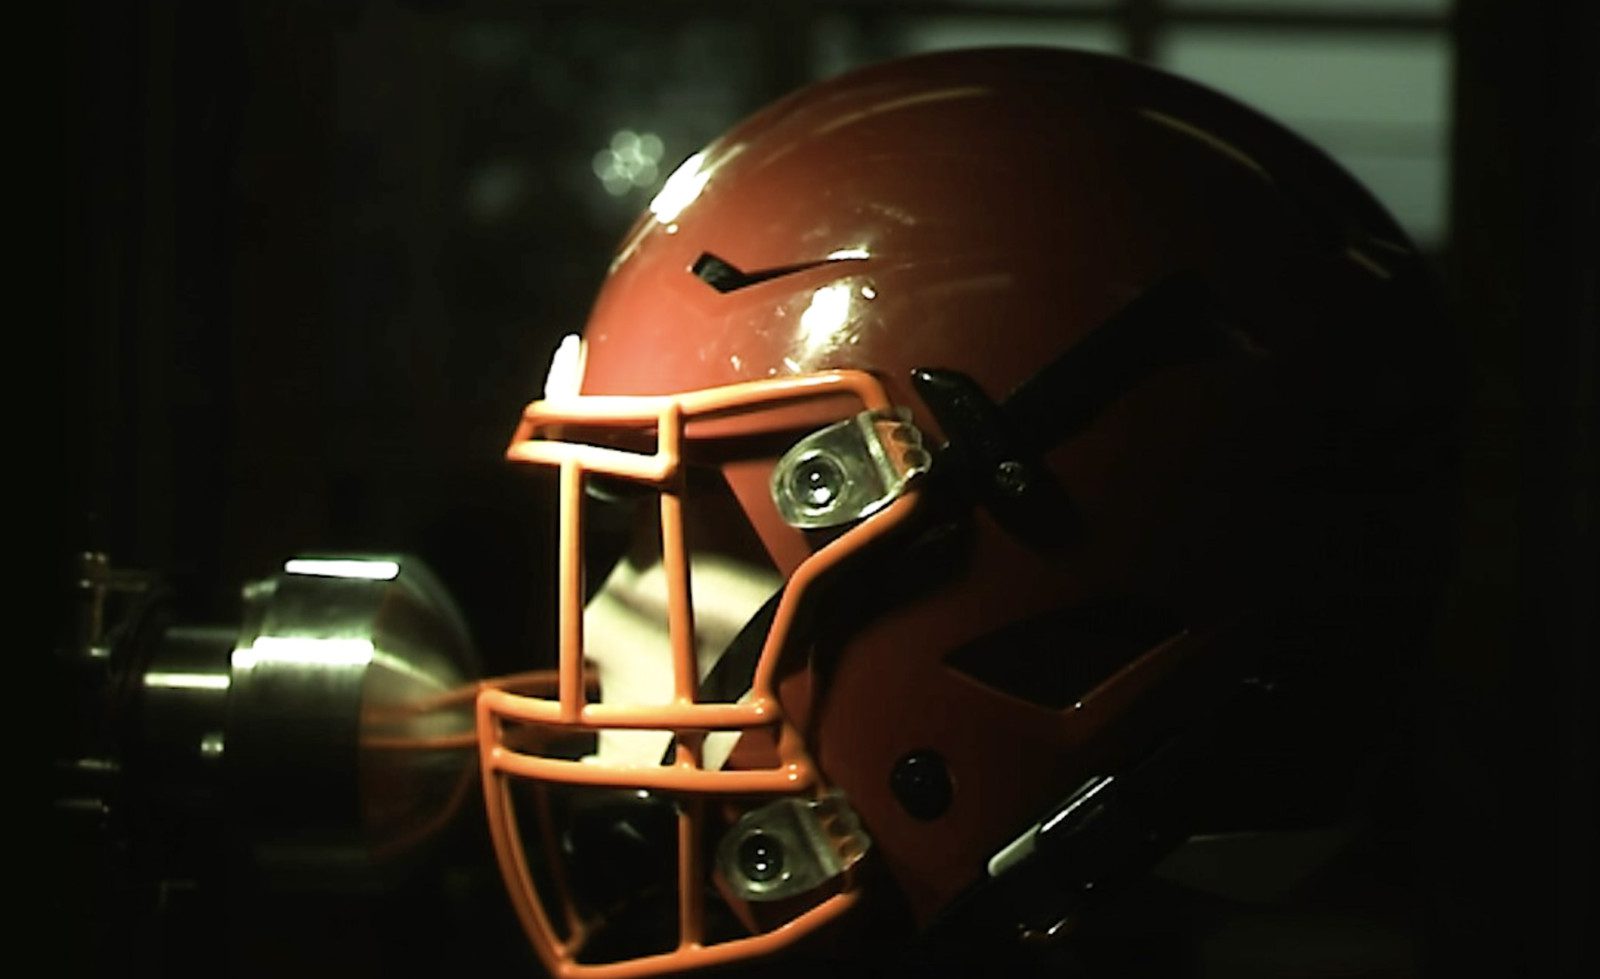 A Clemson team is studying facemasks to create safer football helmets.